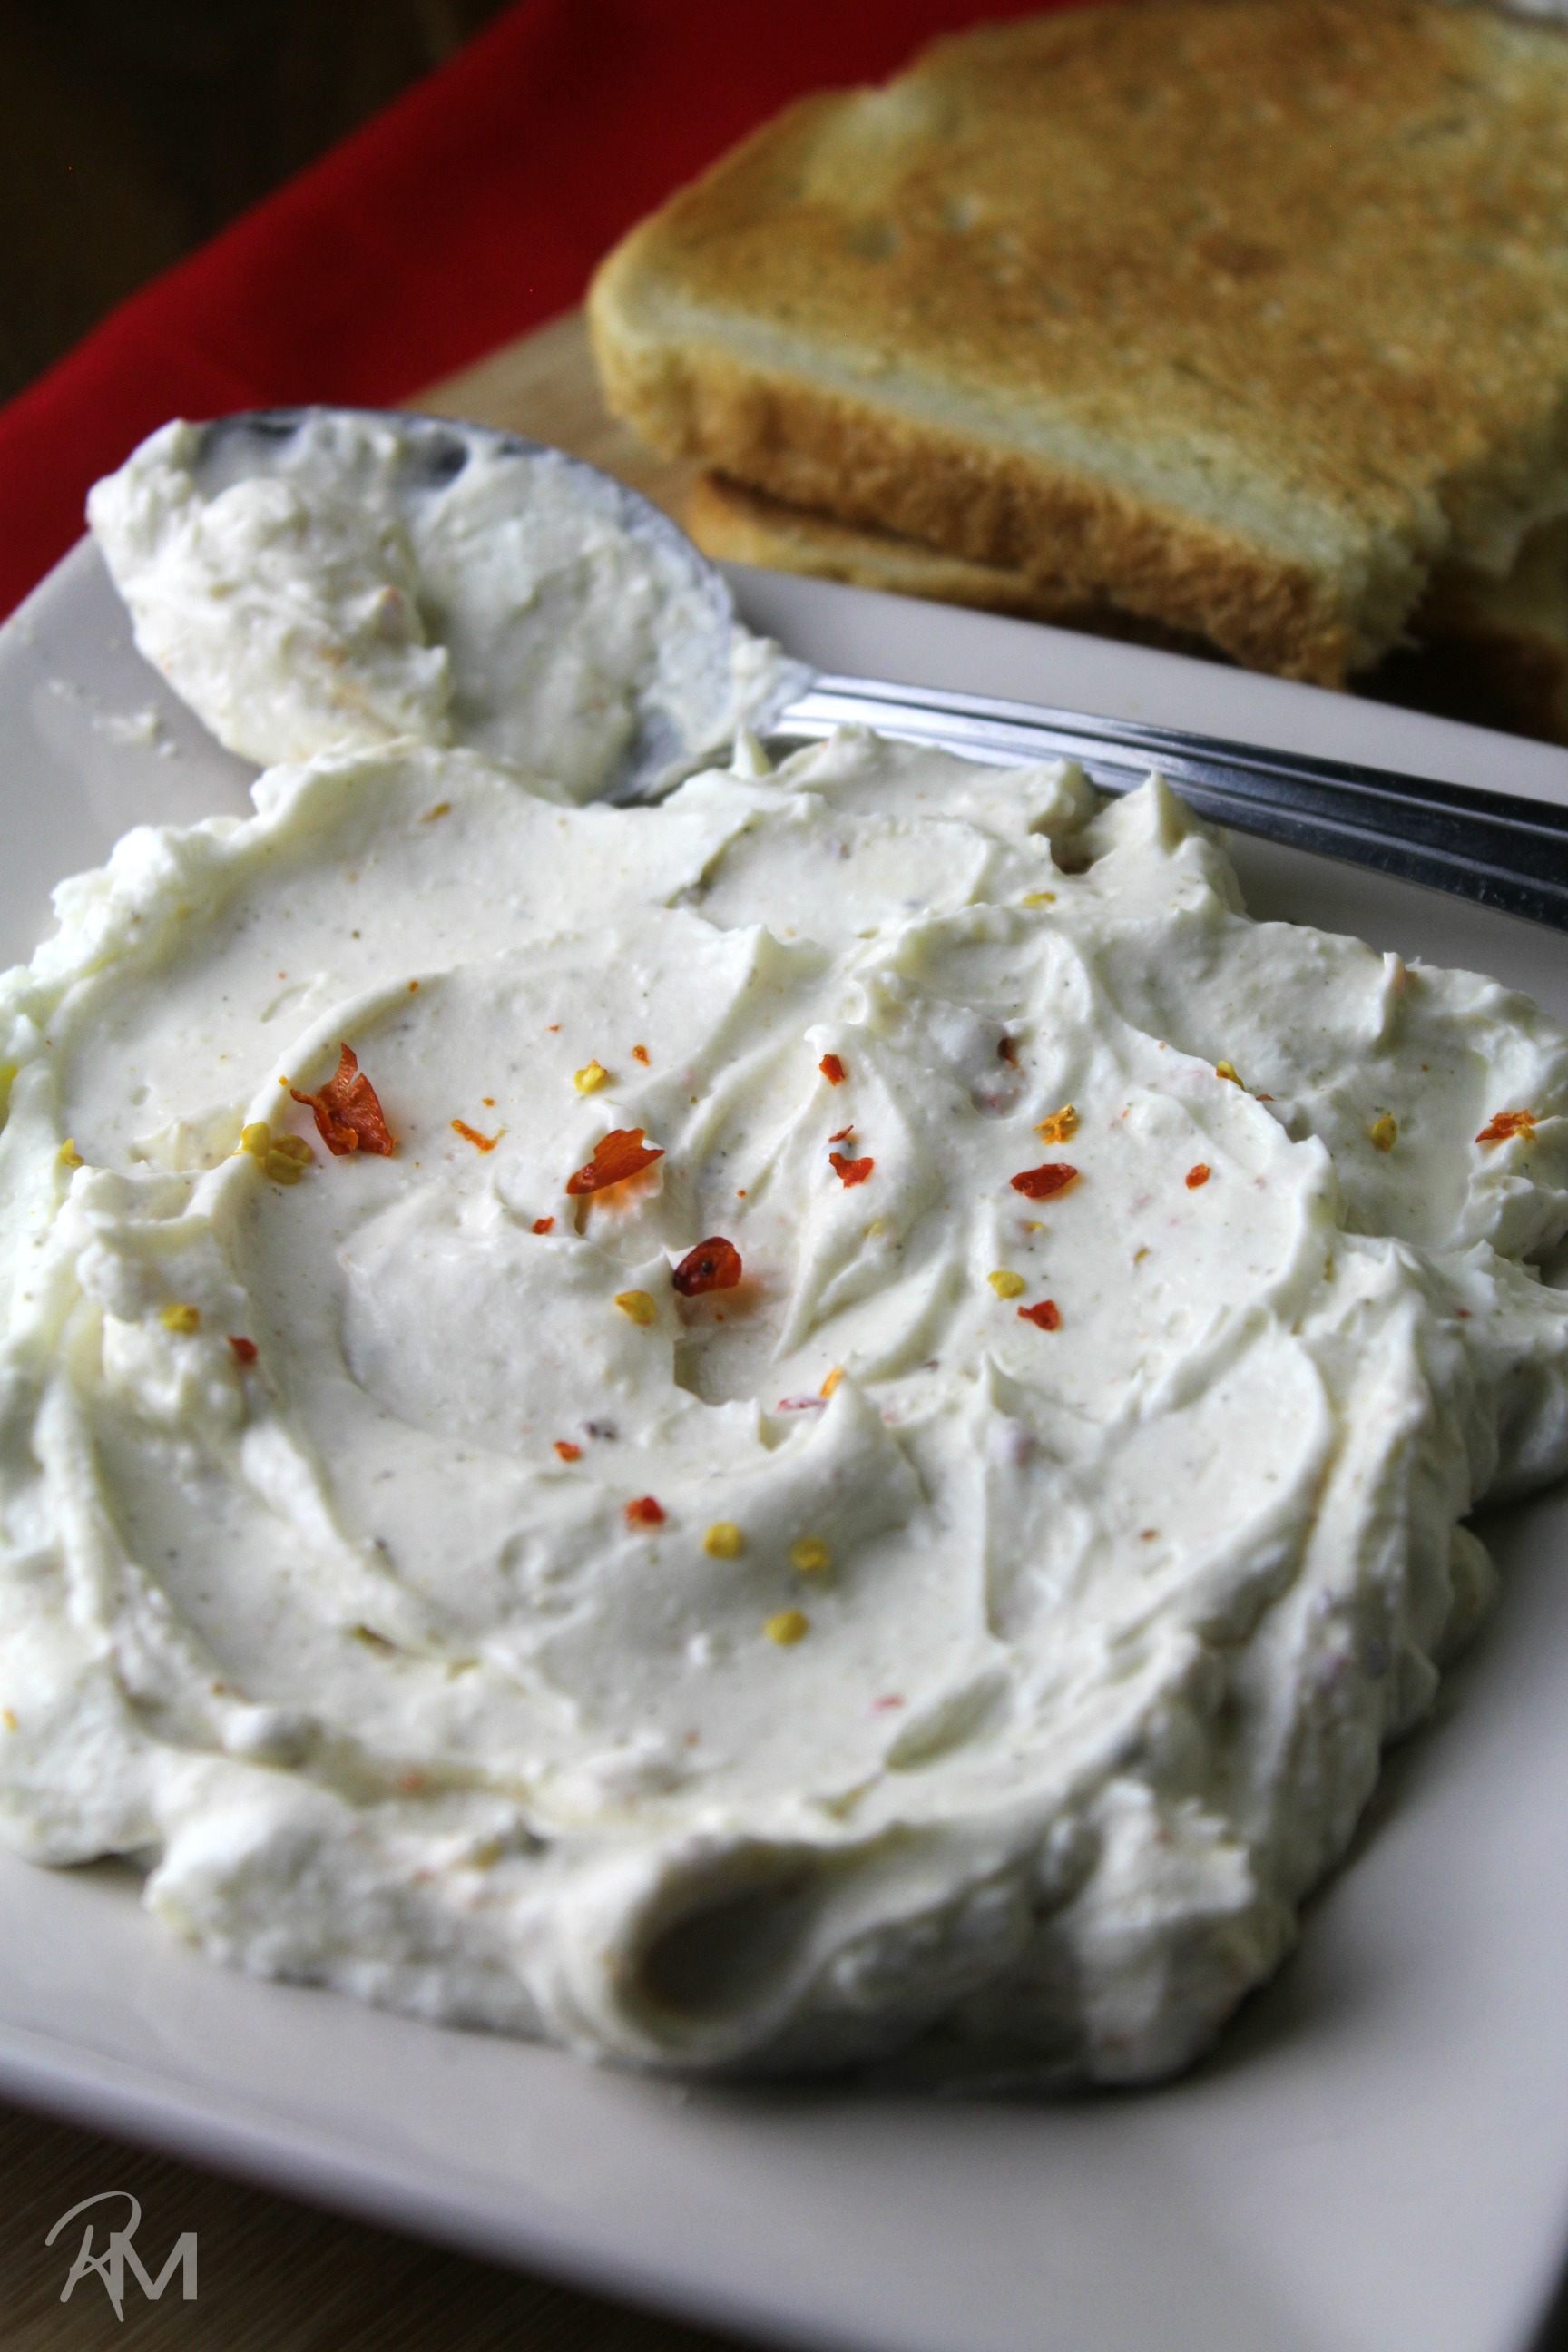 A simple yogurt cheese that includes spicy chiltepin, herbs and salt that is perfect for dipping vegetables or smearing on toasted bread.